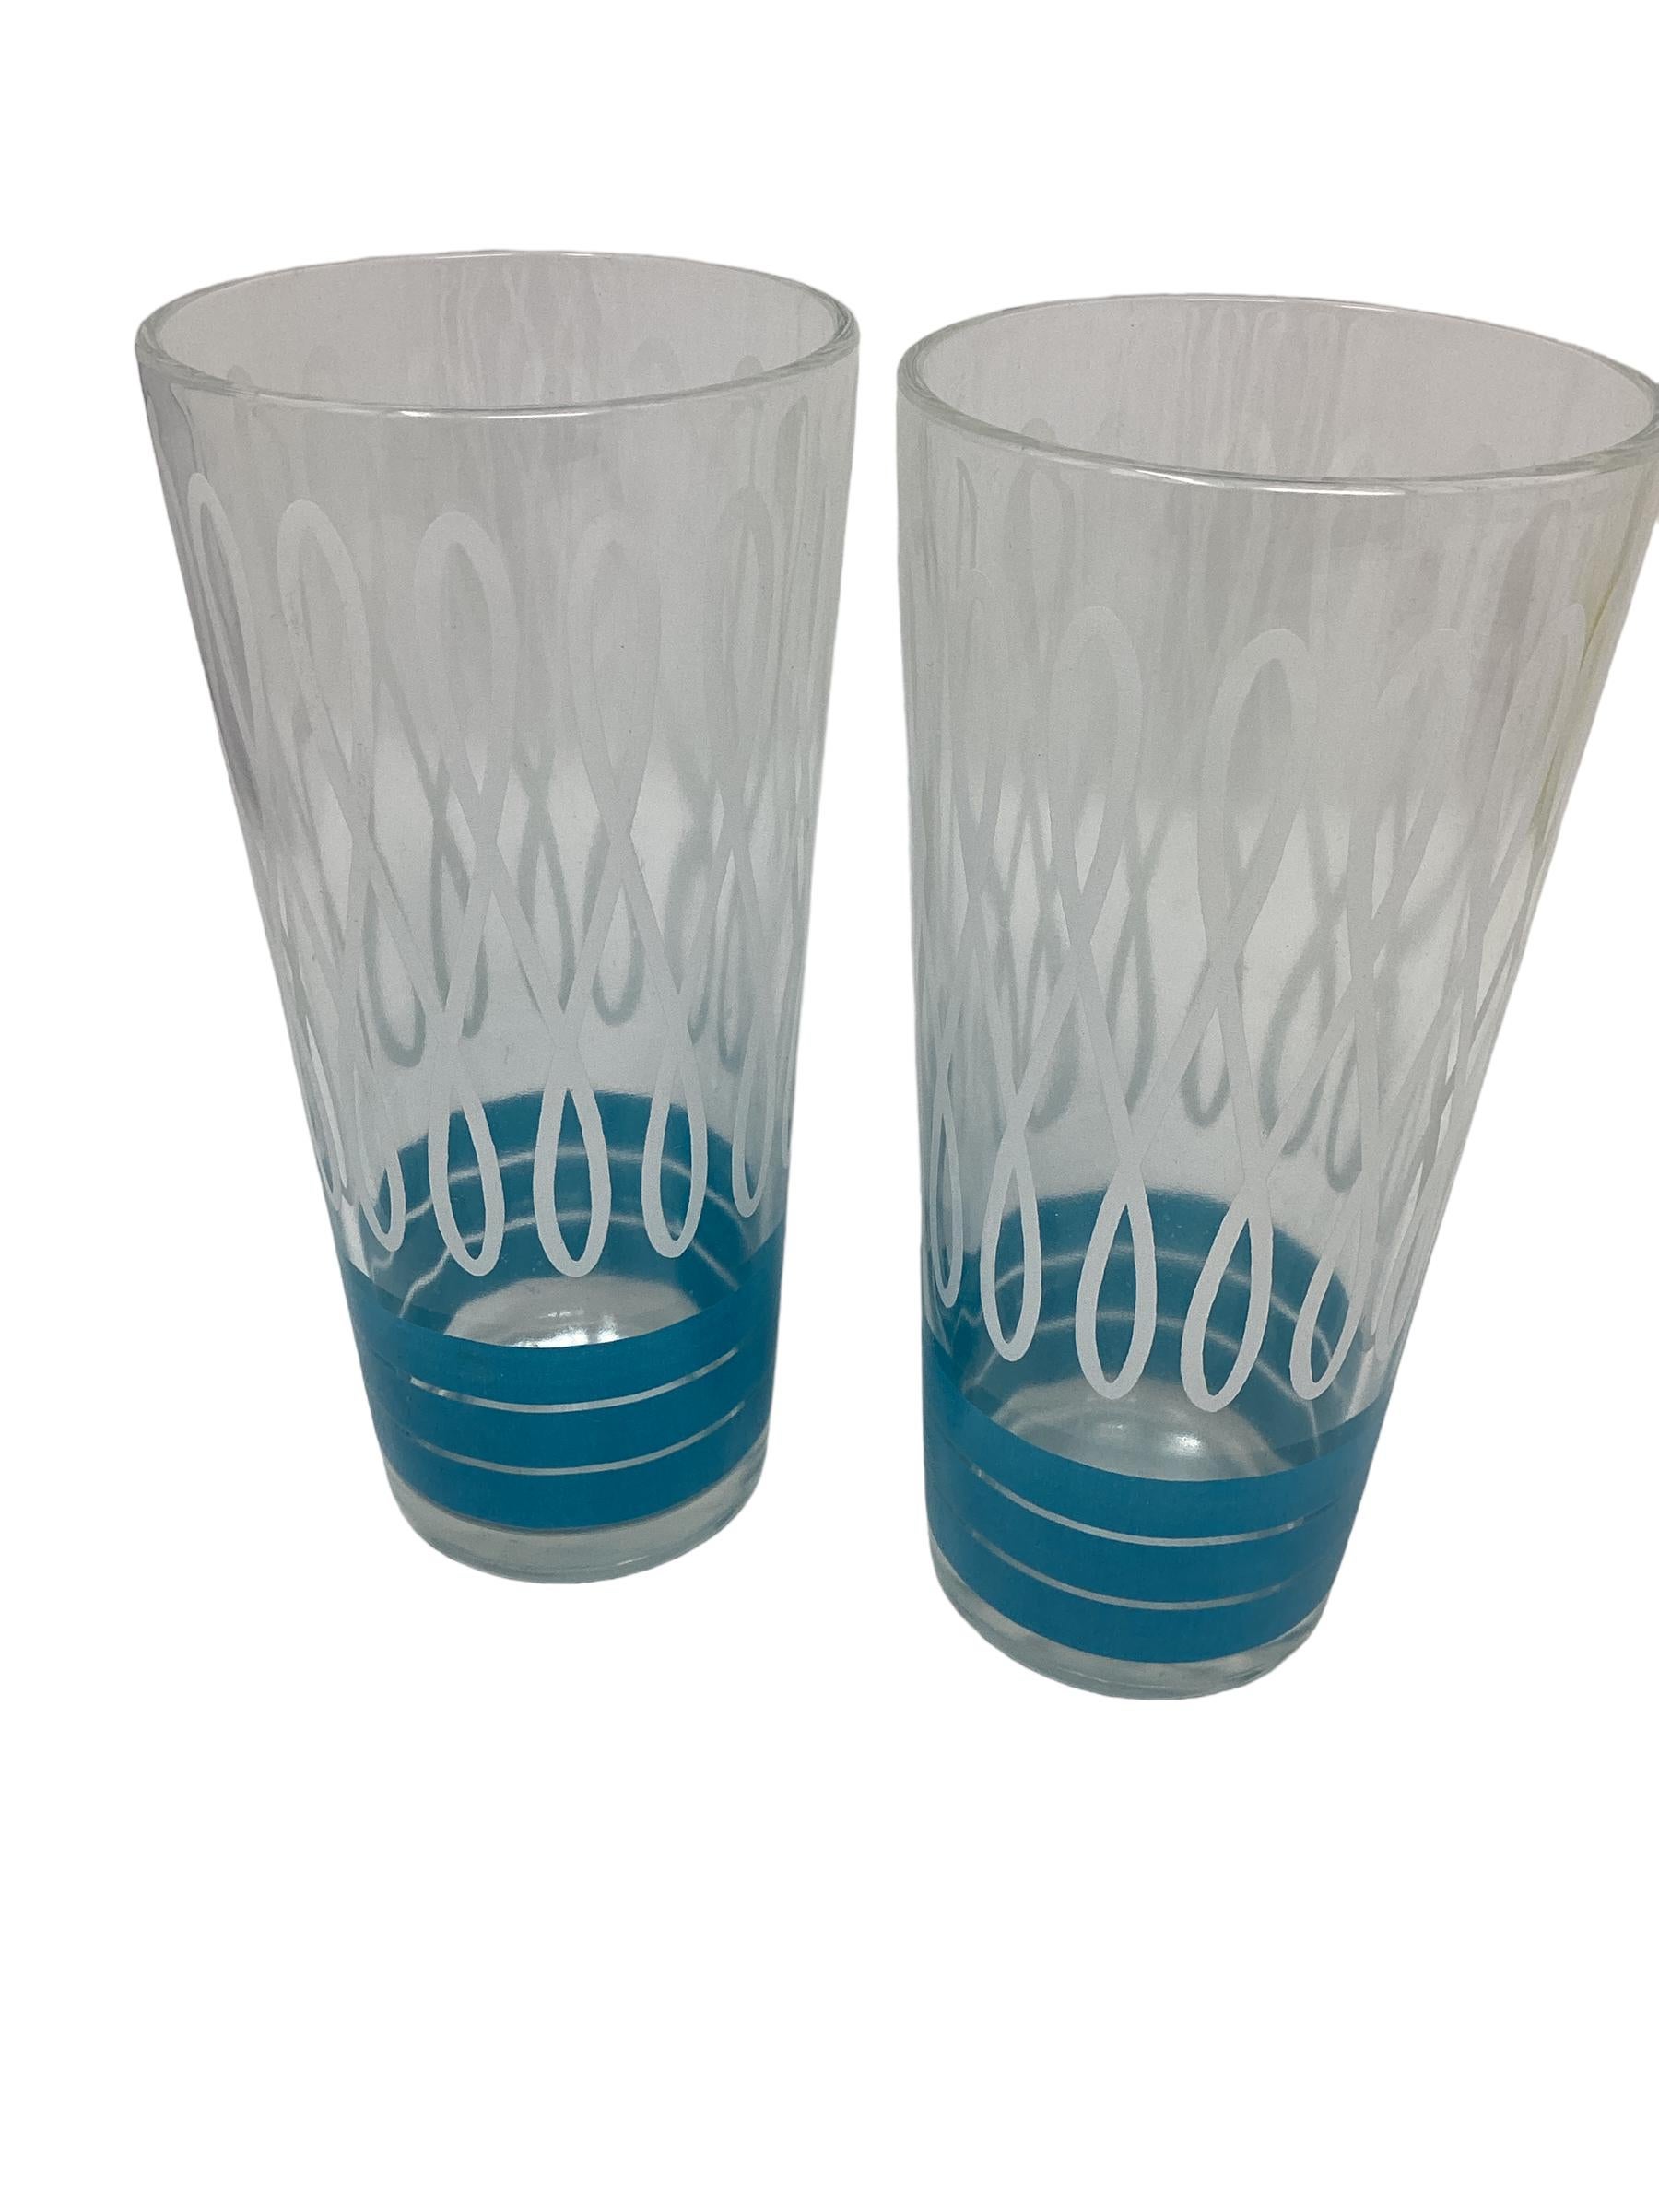 20th Century Set of 8 Vintage Tumblers with White Swirled Design and Colored Bands  For Sale